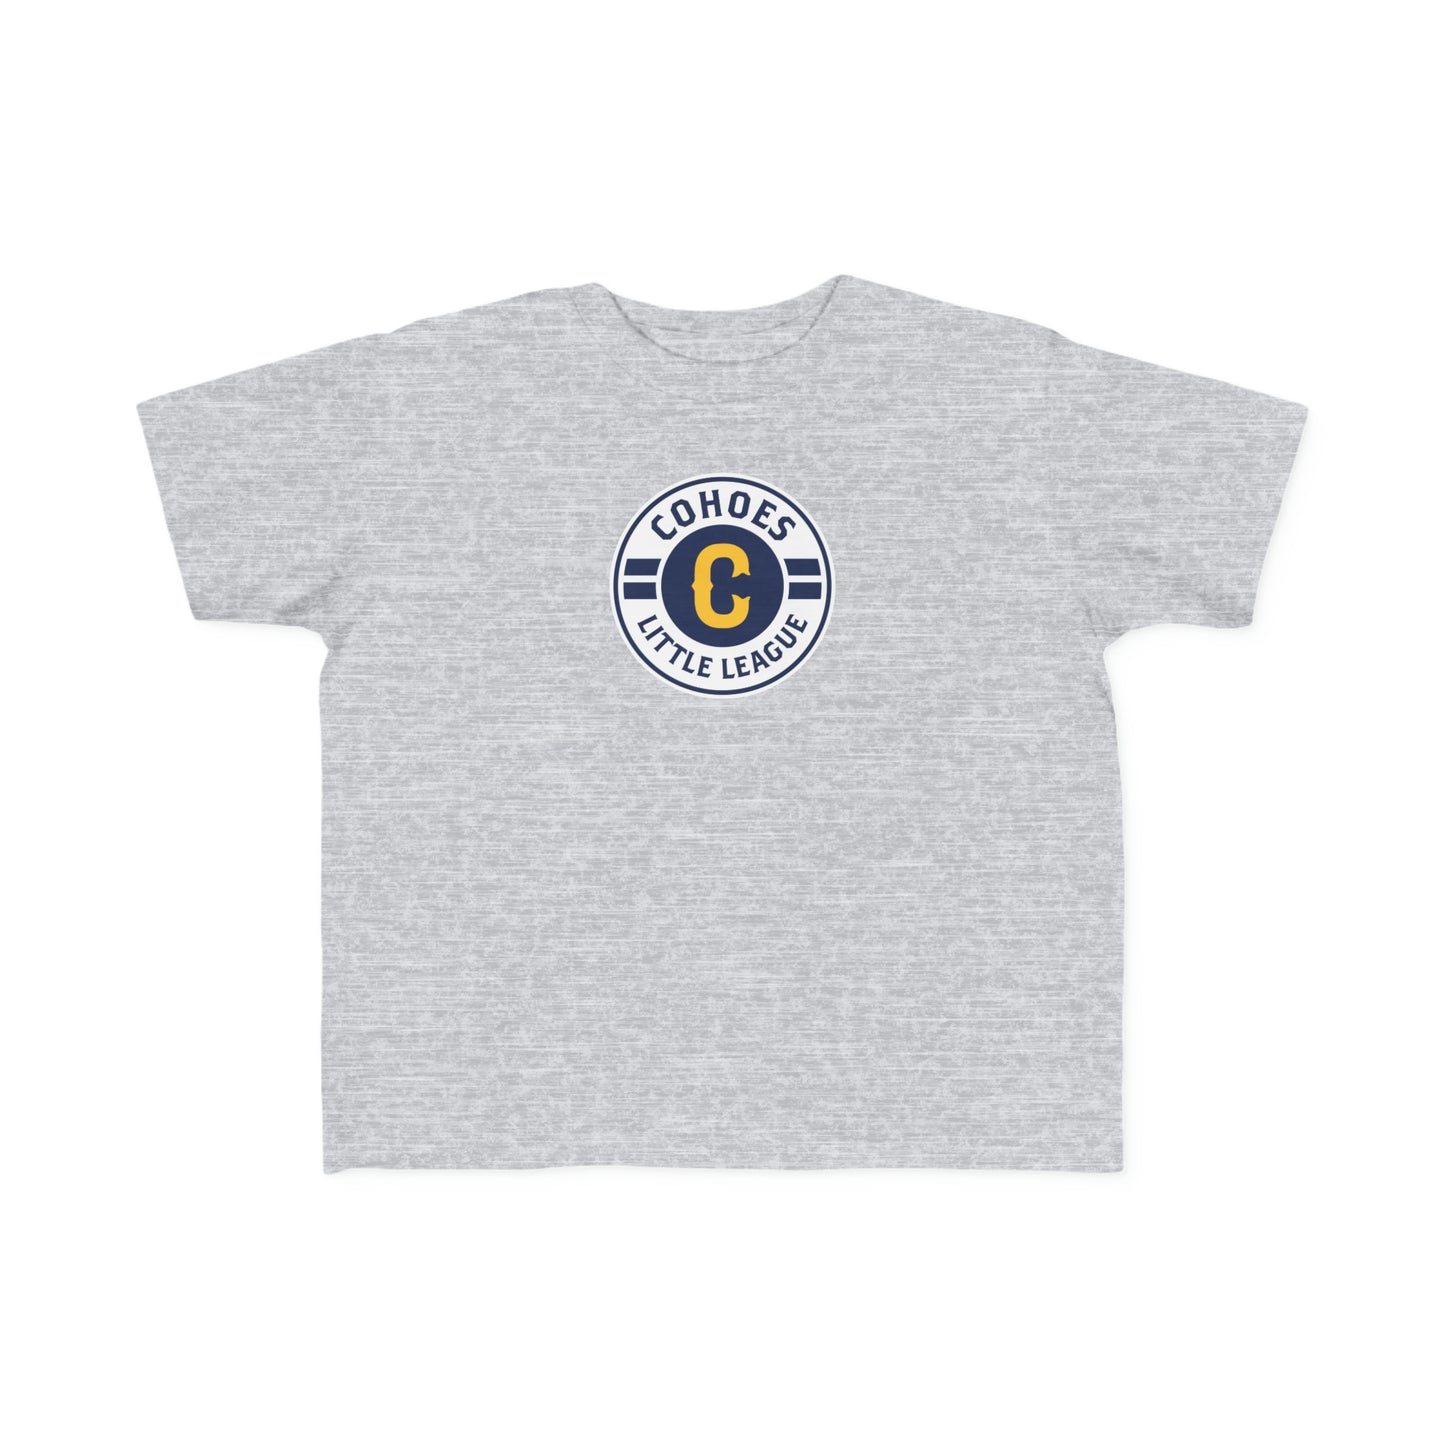 Cohoes Little League Toddler's Fine Jersey Tee